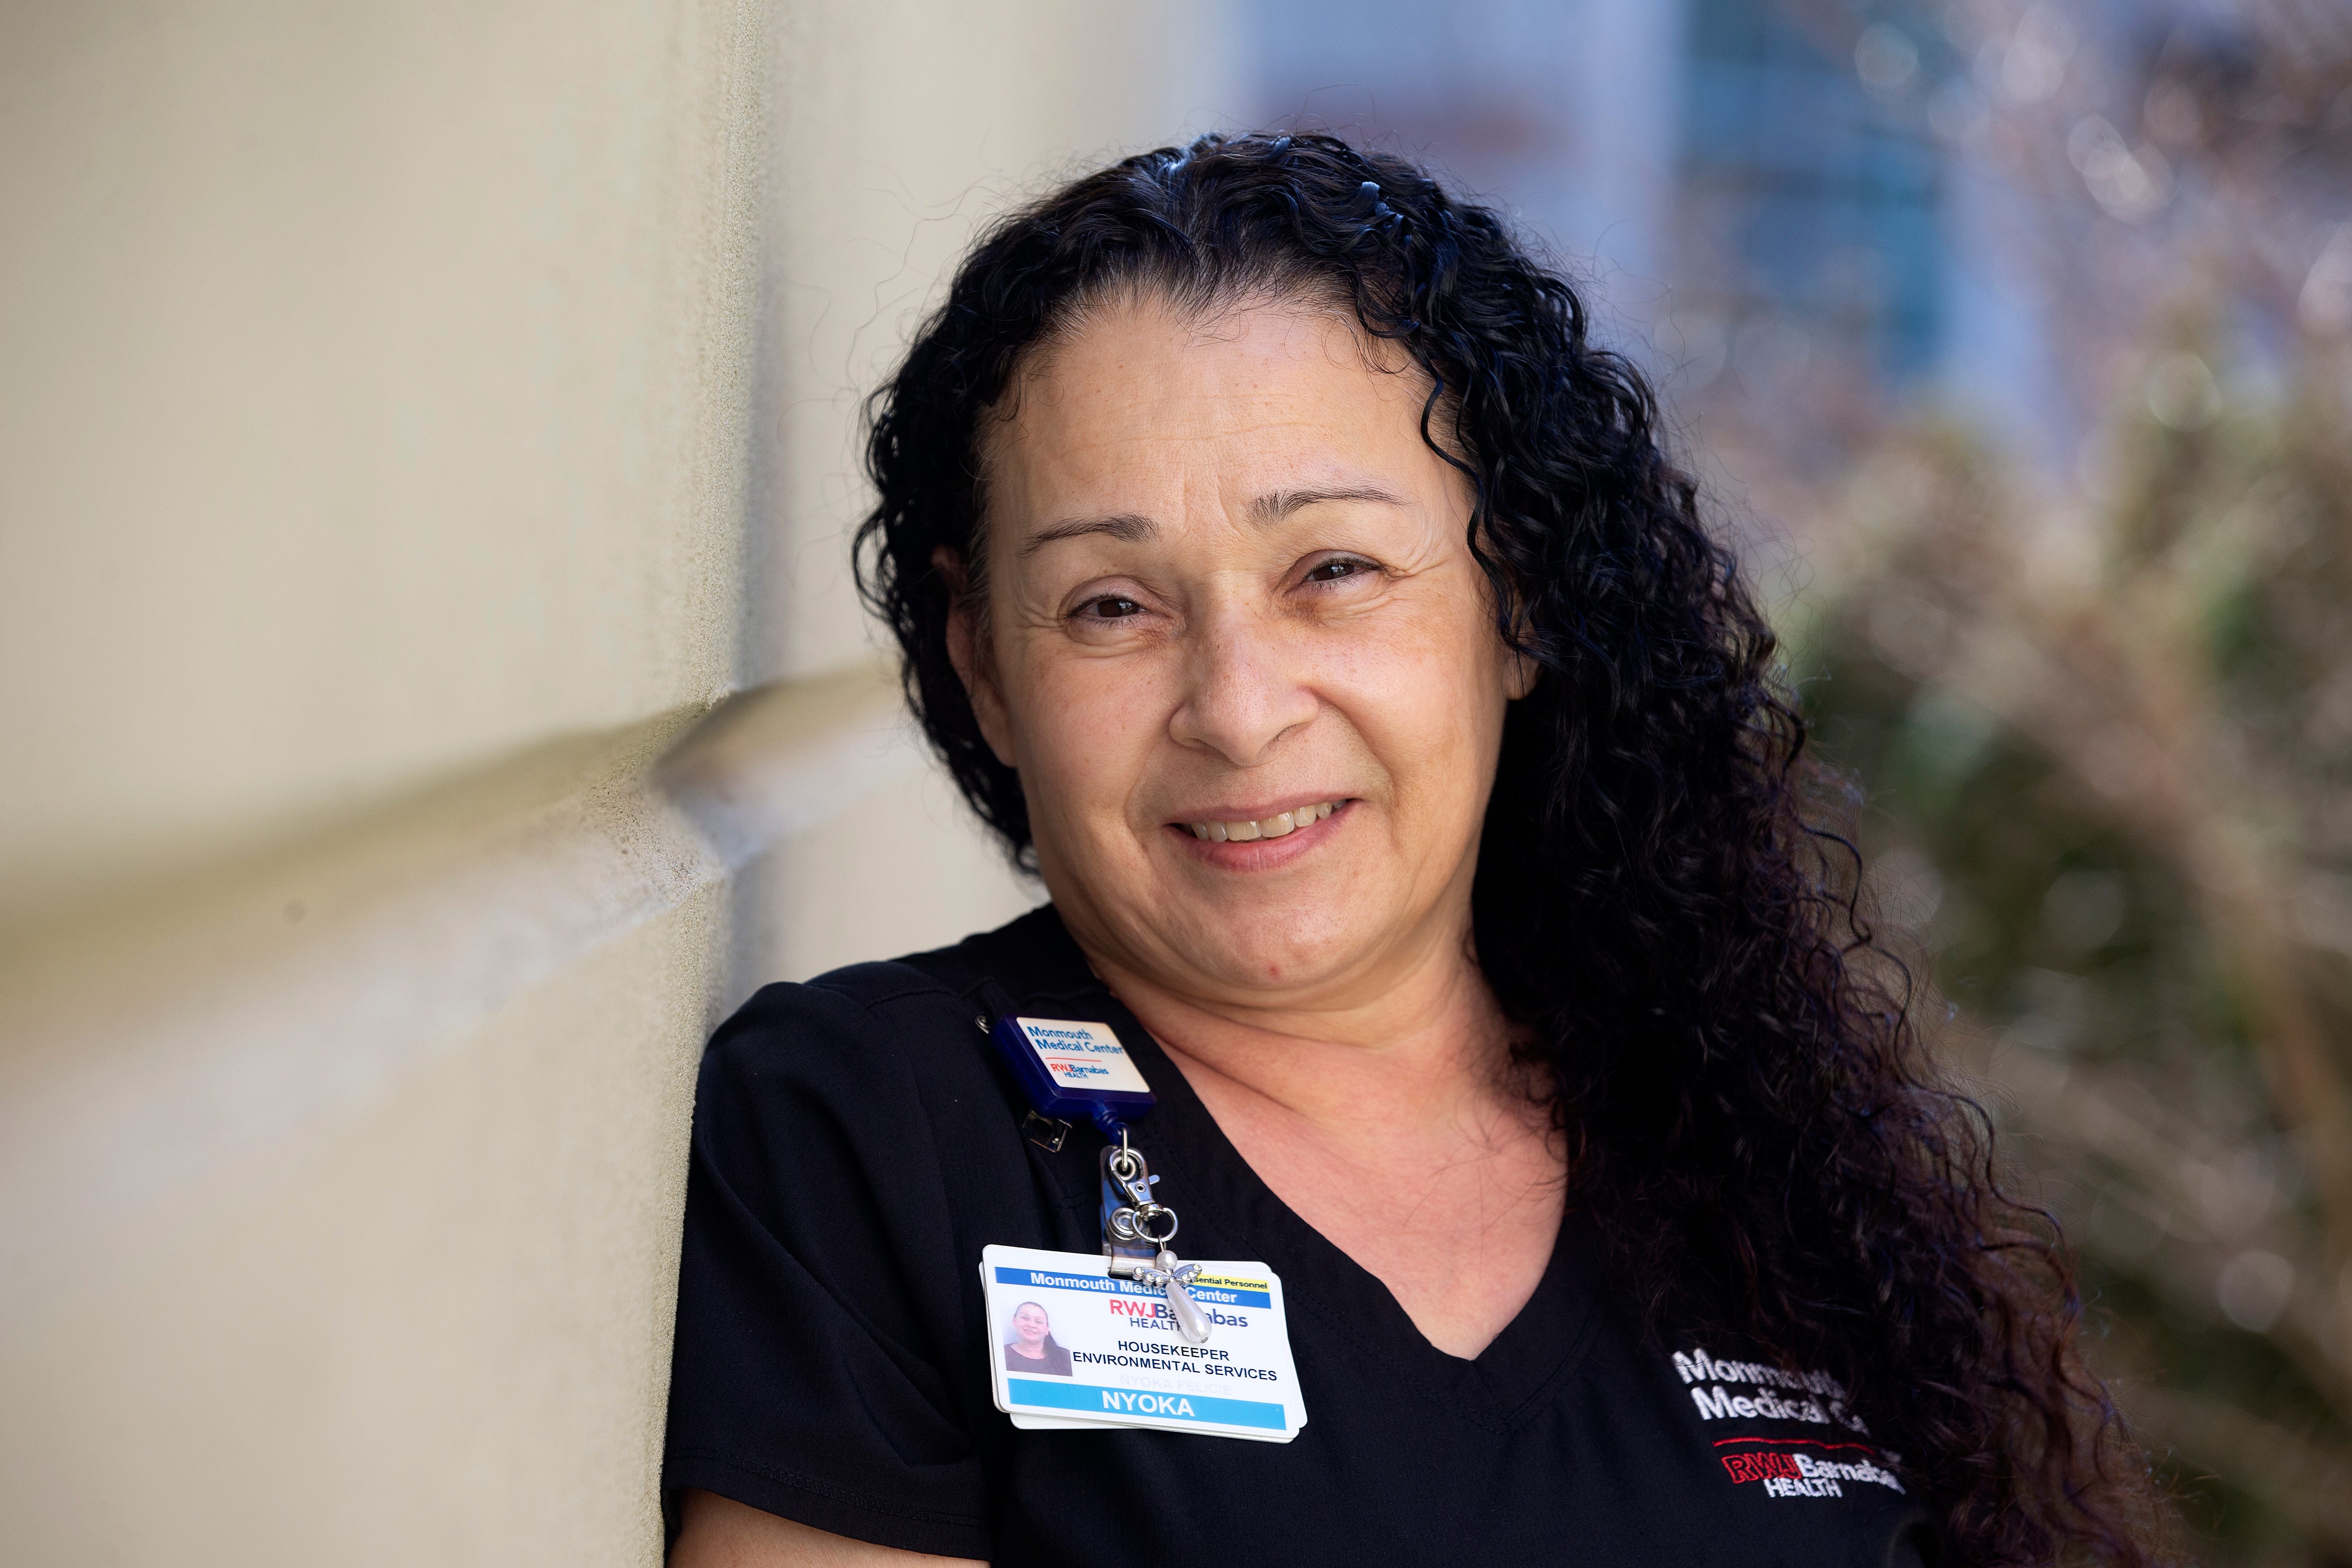 Nyoka Felicie, housekeeper, talks about working through the COVID-19 pandemic and the impact it has had on her life at Monmouth Medical Center in Long Branch, NJ Tuesday, February 8, 2022.